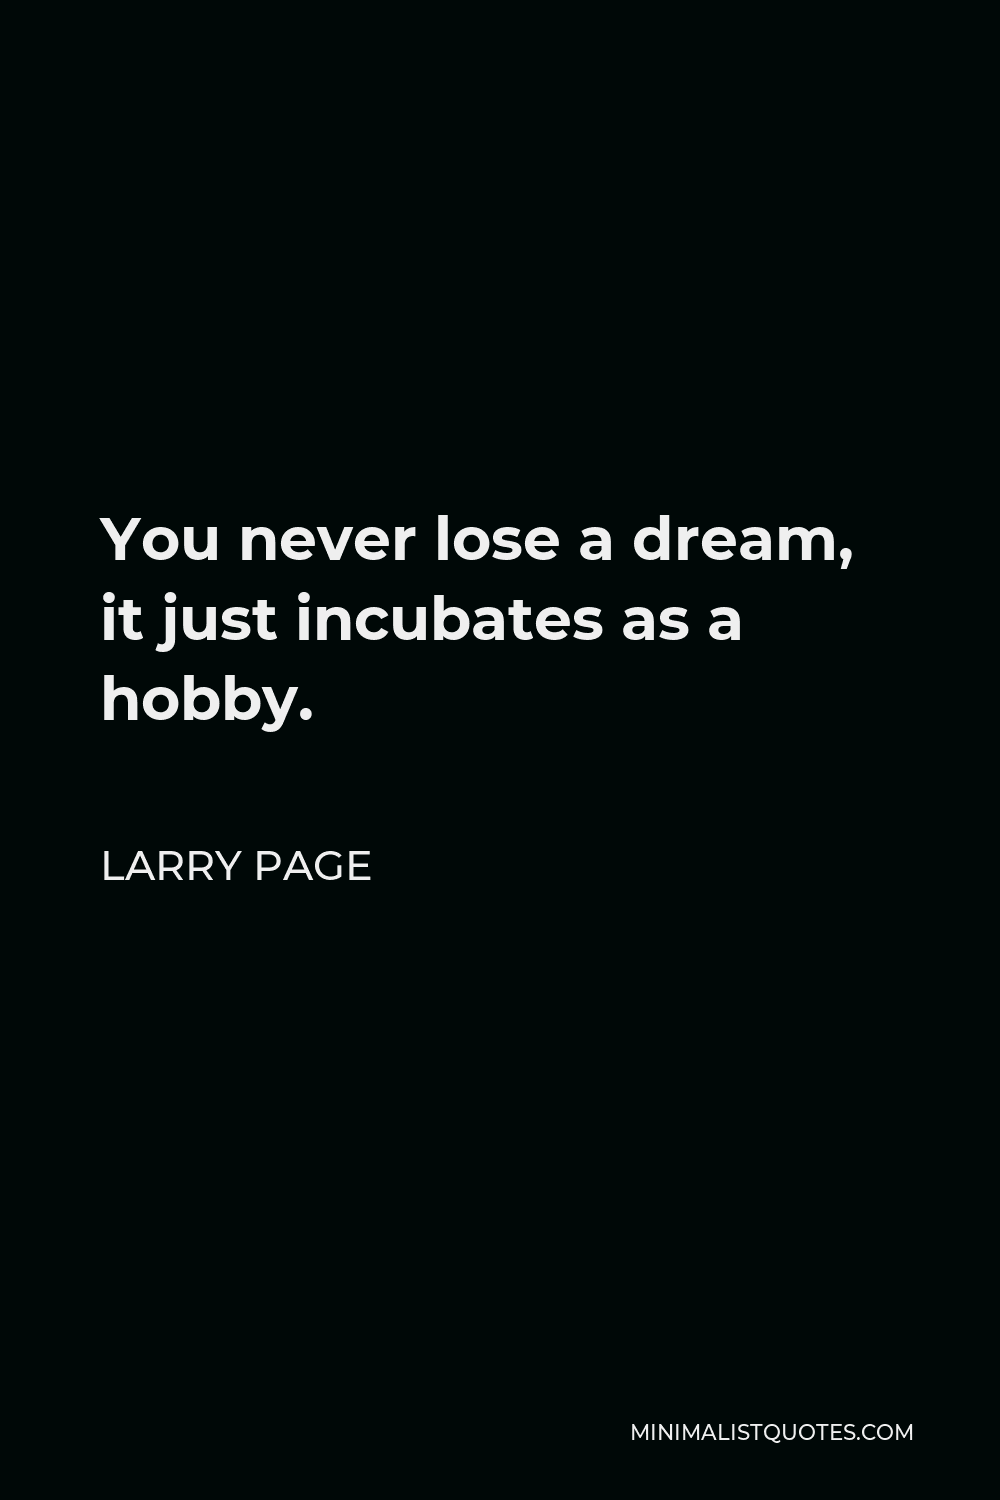 Larry Page Quote - You never lose a dream, it just incubates as a hobby.